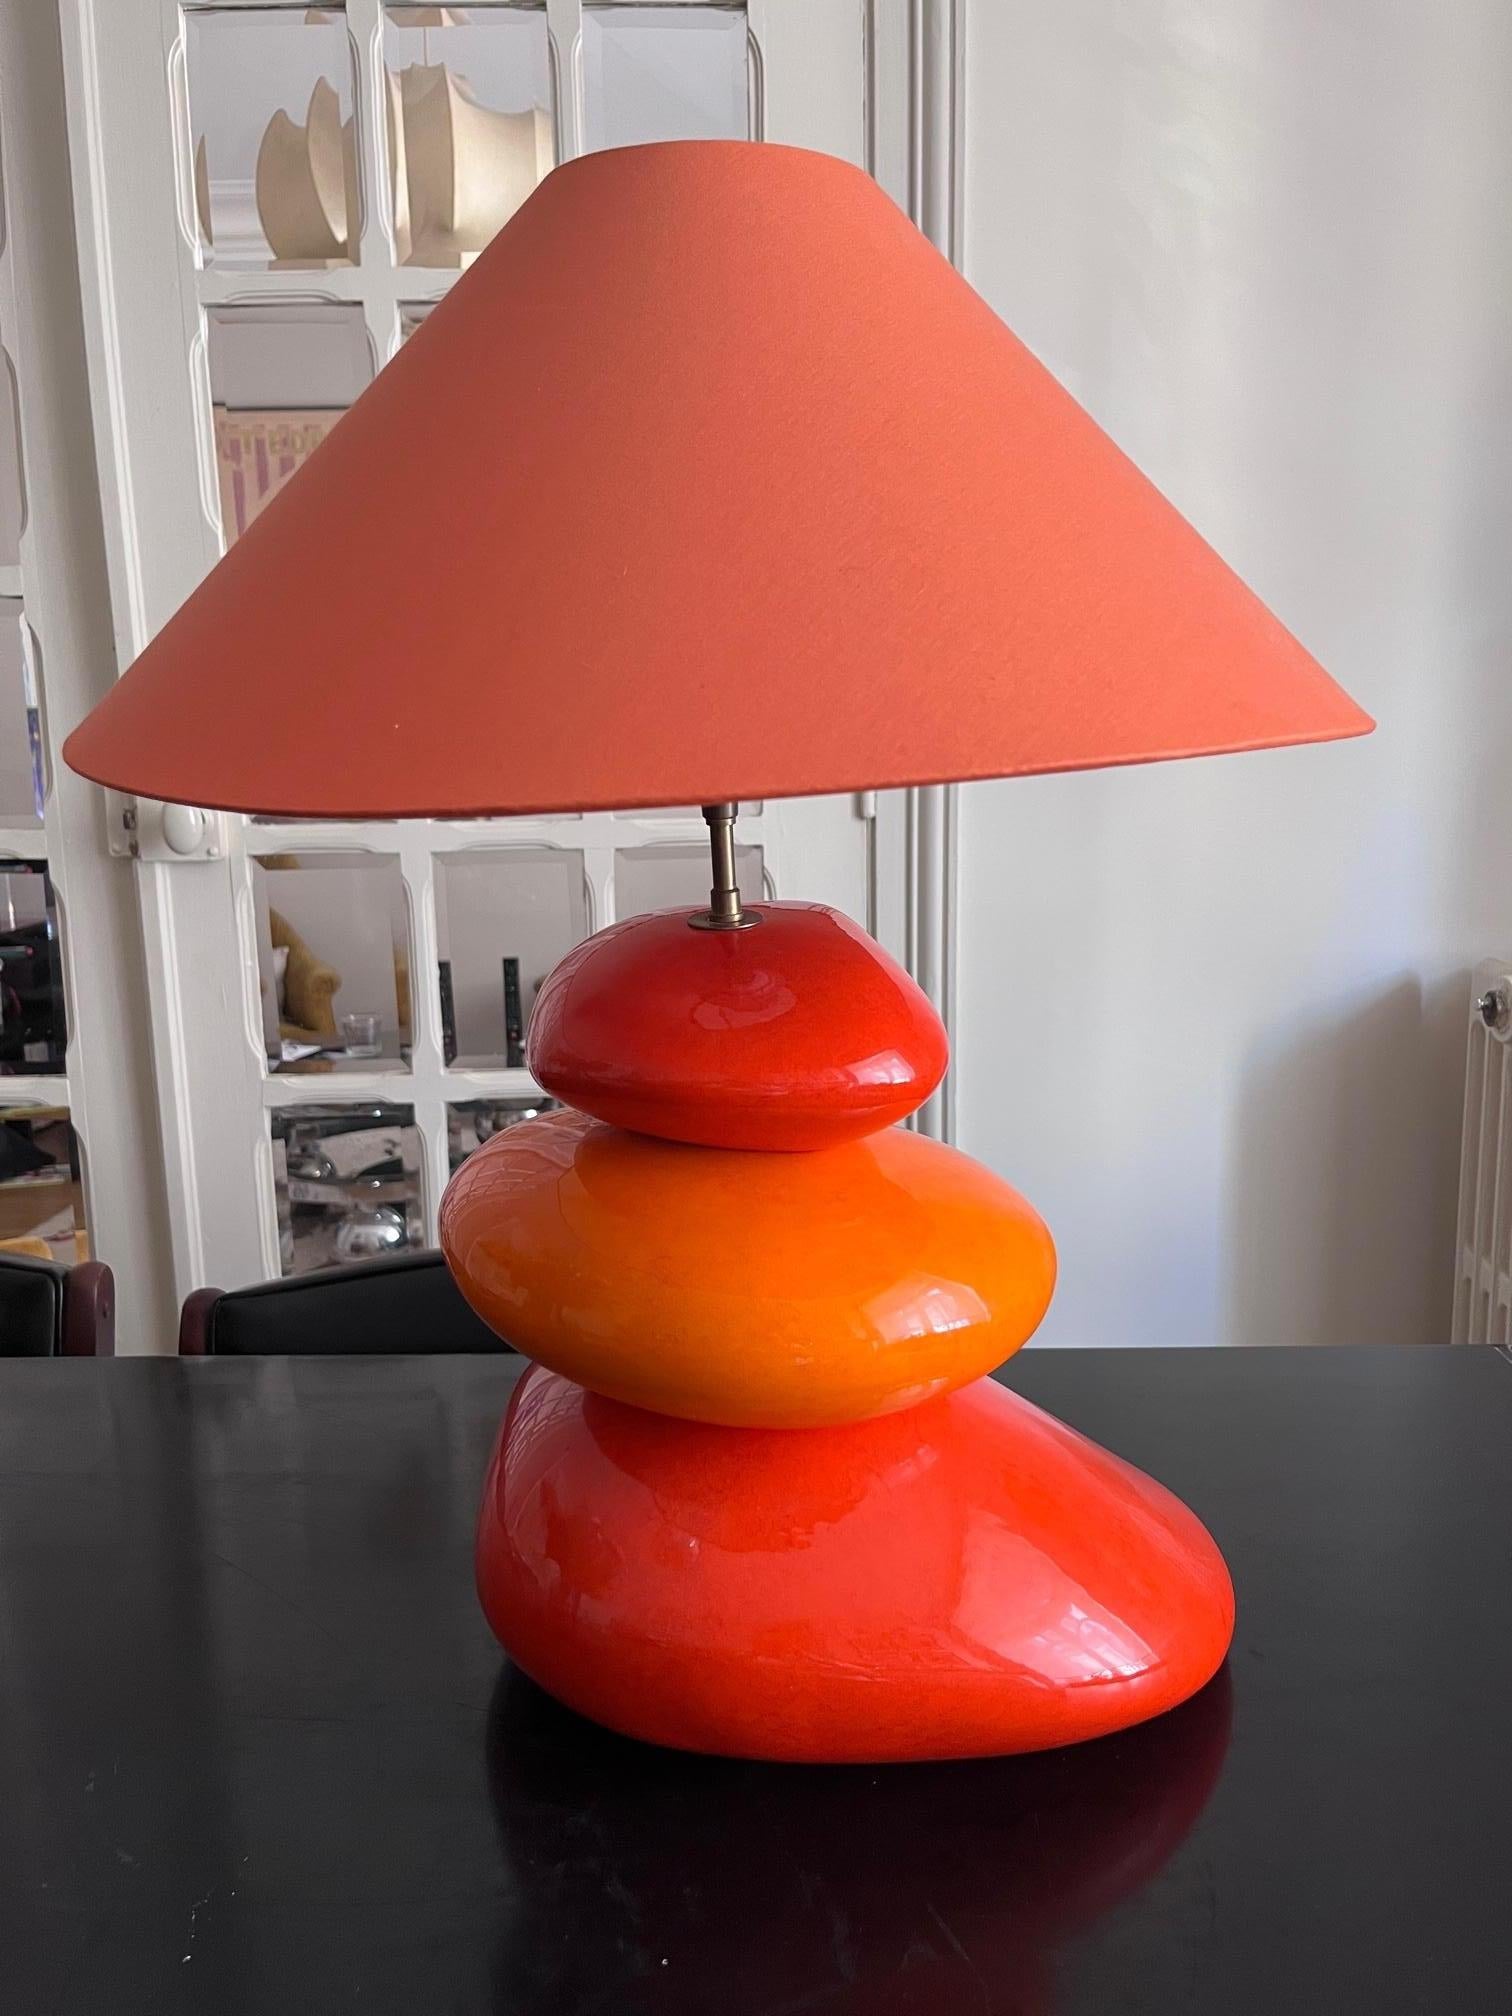 Beautiful lamp designed by francois châtain, original shade from the 1970's
model Karek.
 